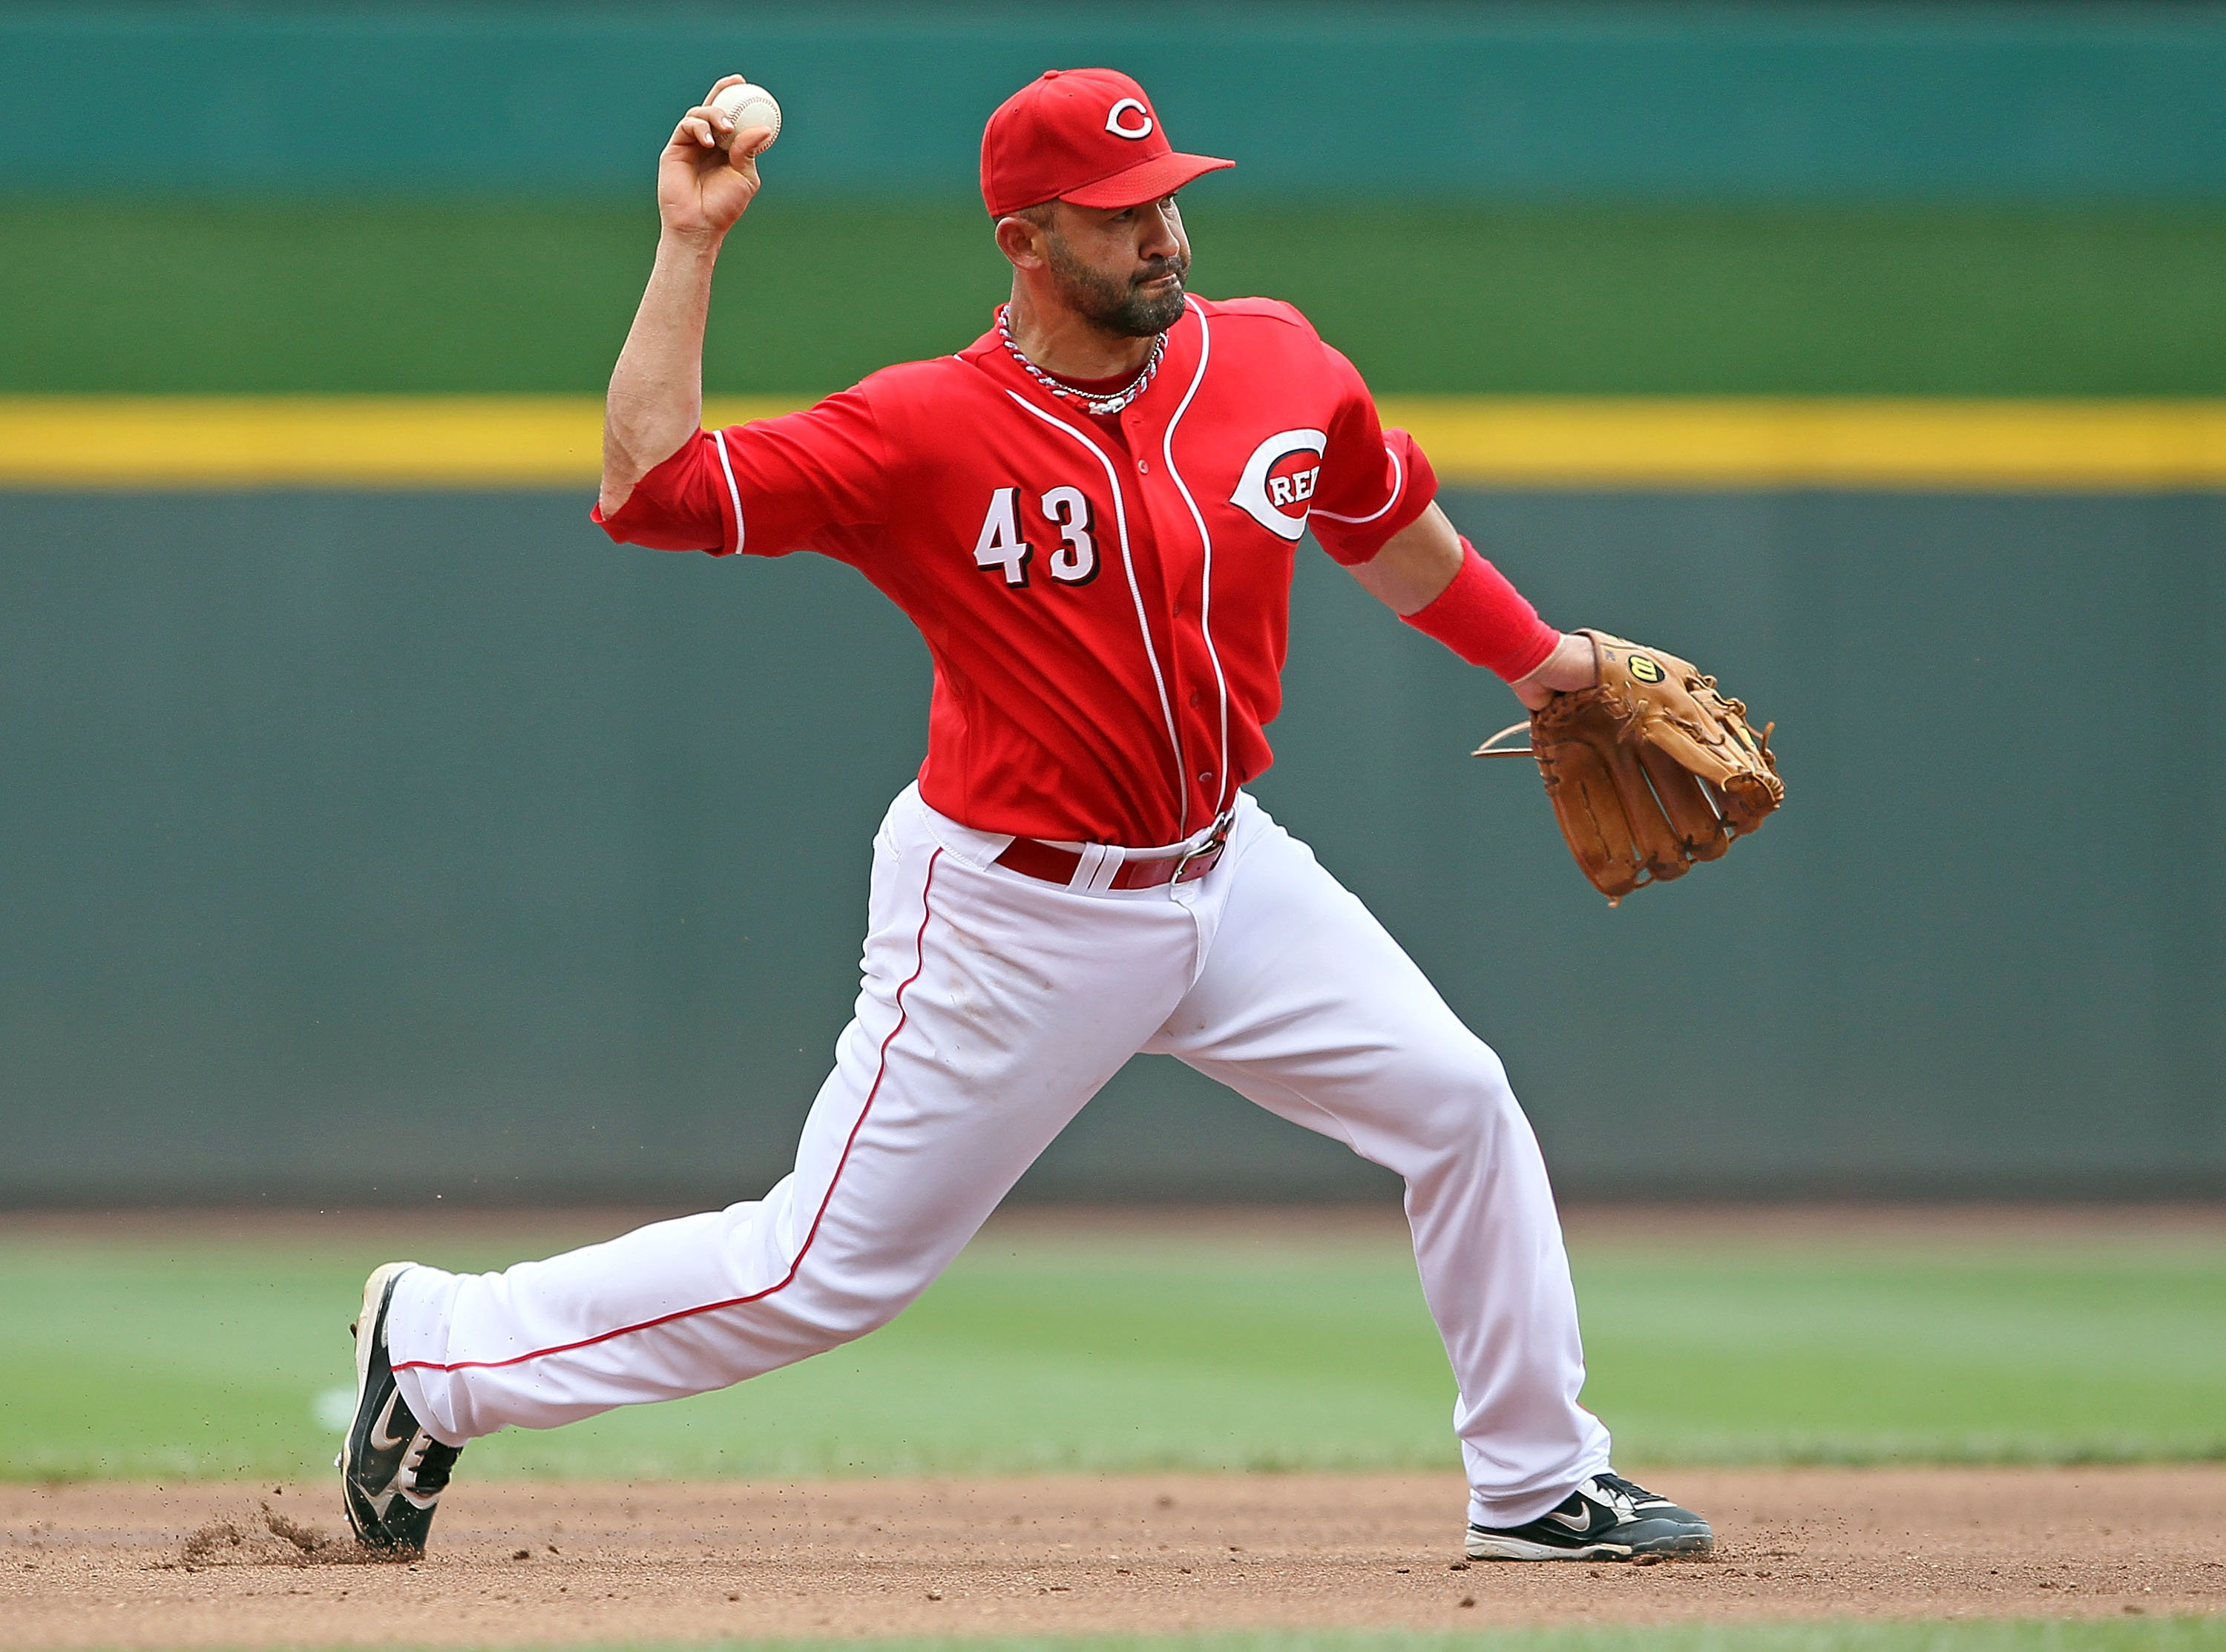 CINCINNATI - JULY 18: Miguel Cairo #43 of the Cincinnati Reds throws the ball to first base during the game against the Colorado Rockies at Great American Ball Park on July 18, 2010 in Cincinnati, Ohio.  (Photo by Andy Lyons/Getty Images)